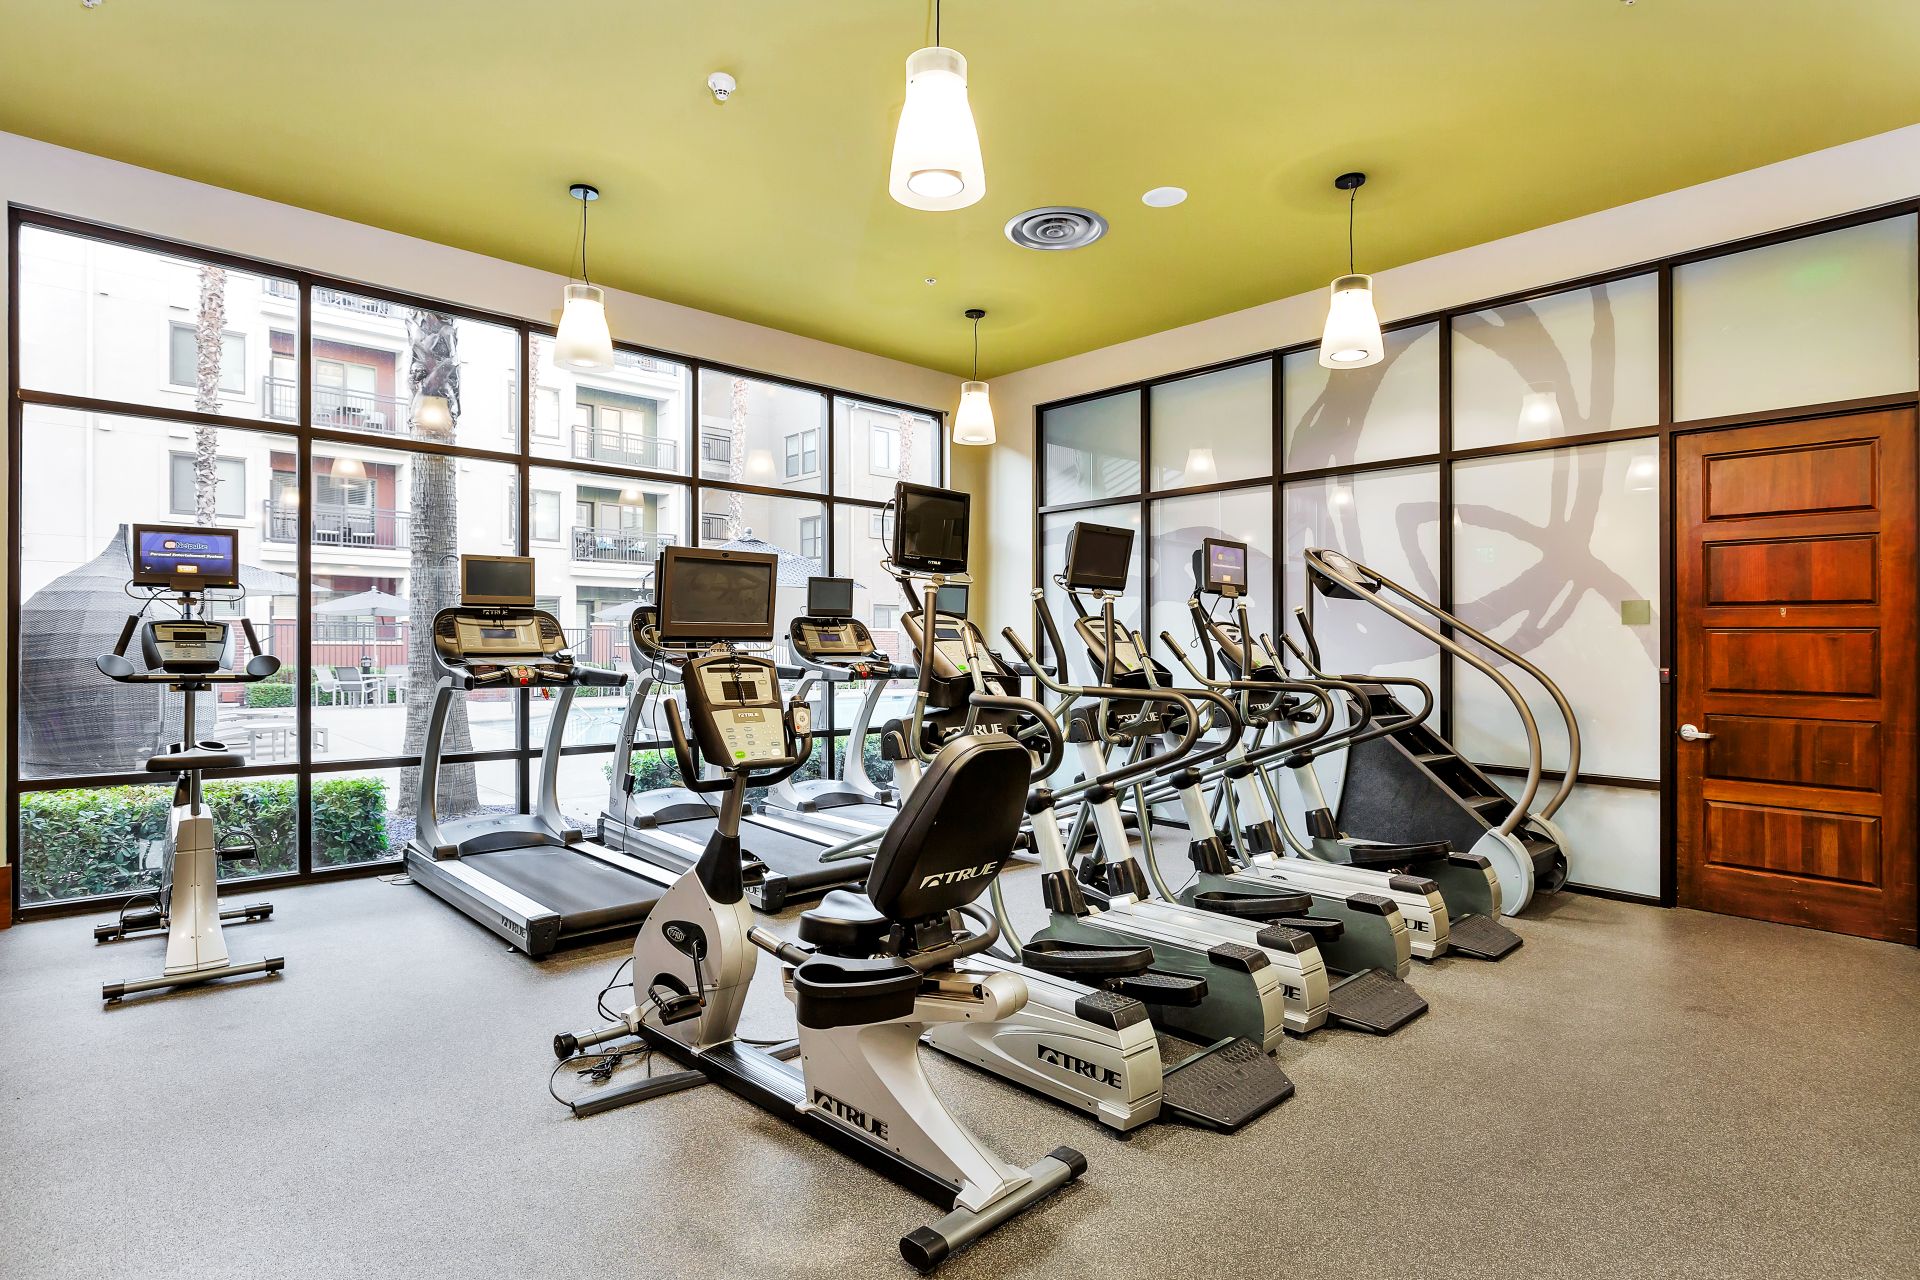 Fitness Center width recumbent bikes and treadmills - thumbnail of larger image